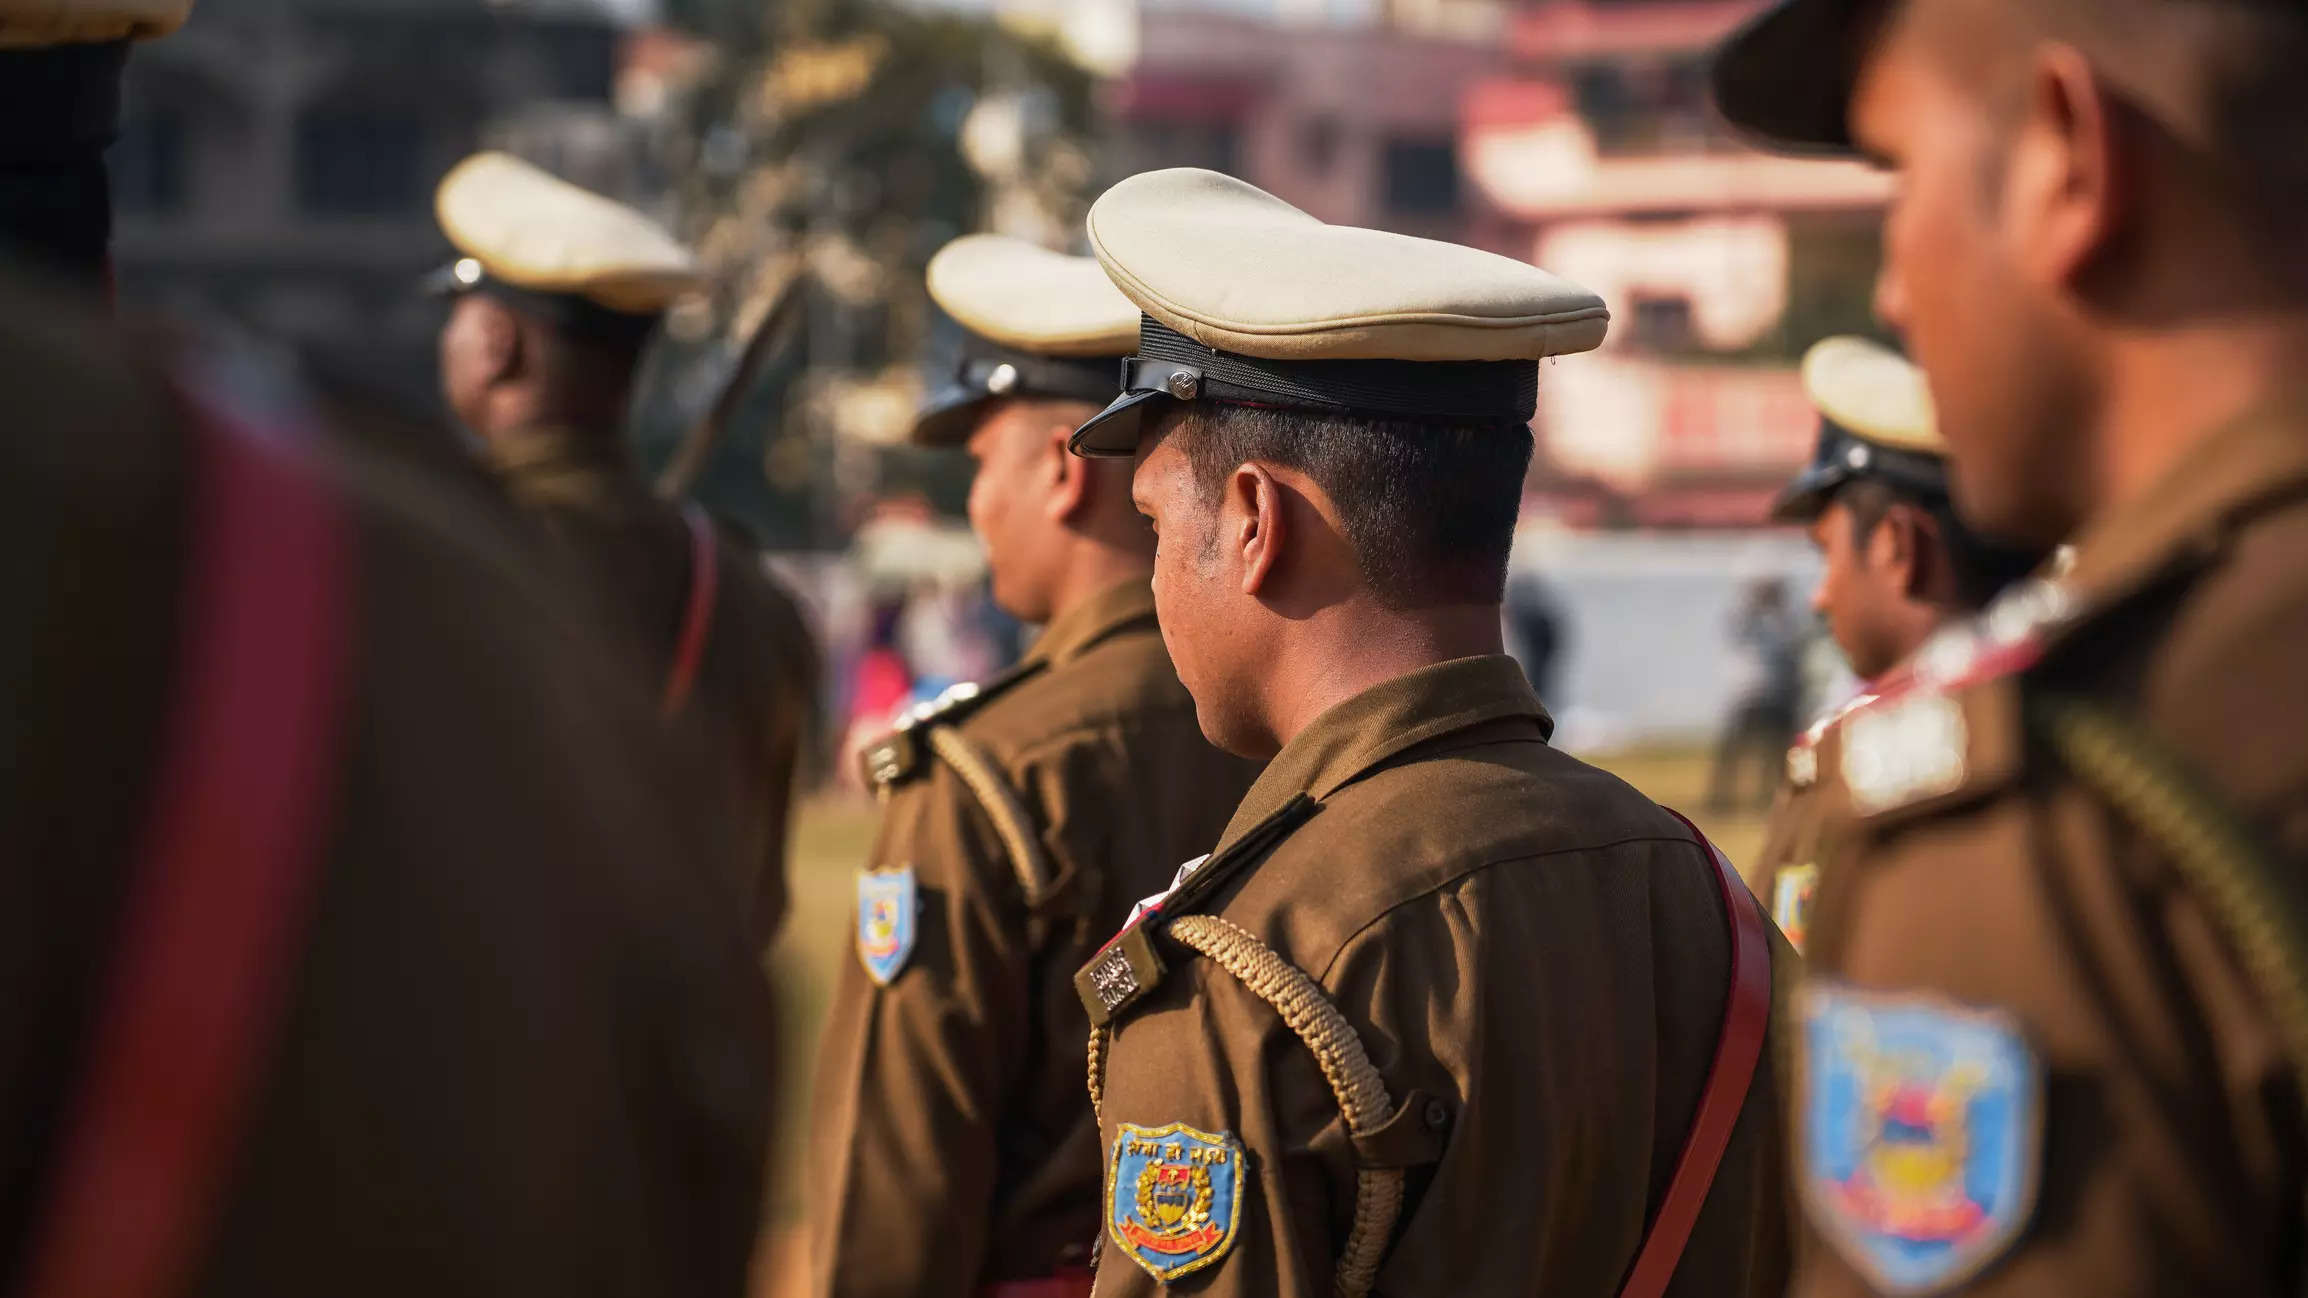 Over 1,200 constables recruited in Himachal Police after retest following paper leak